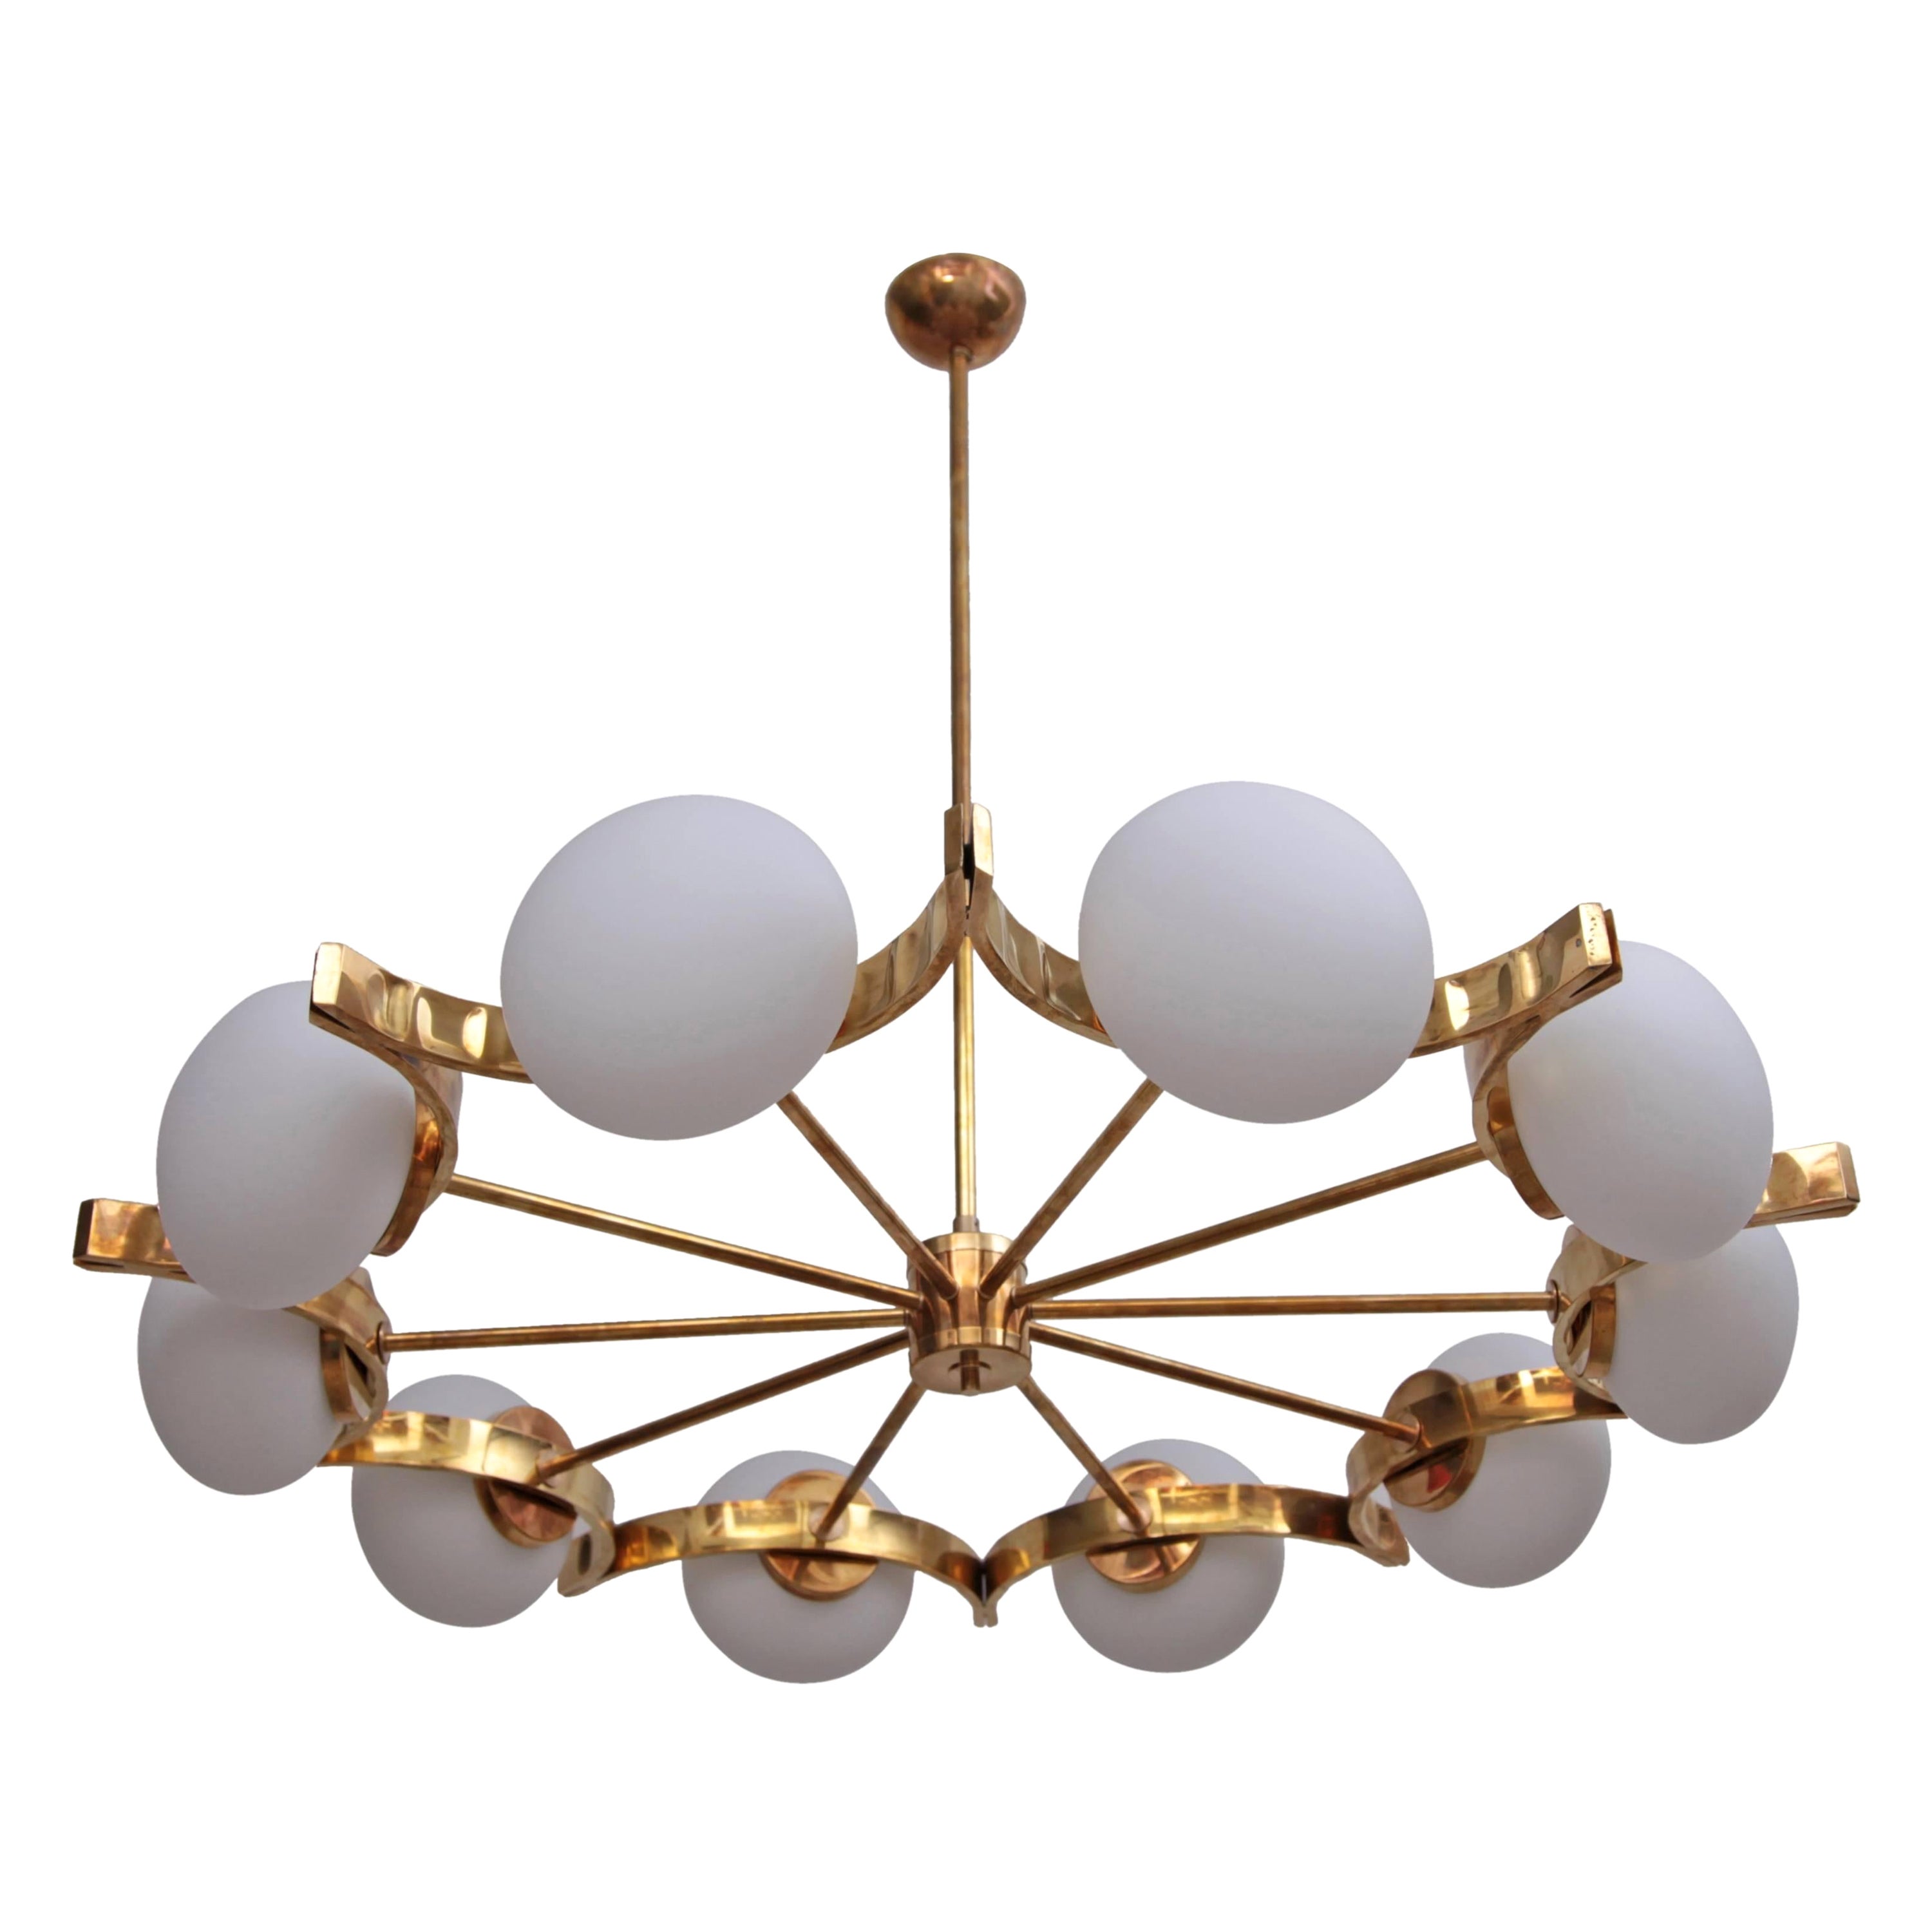 Huge Murano Glass and Brass Chandelier in the Manner of Fontana Arte